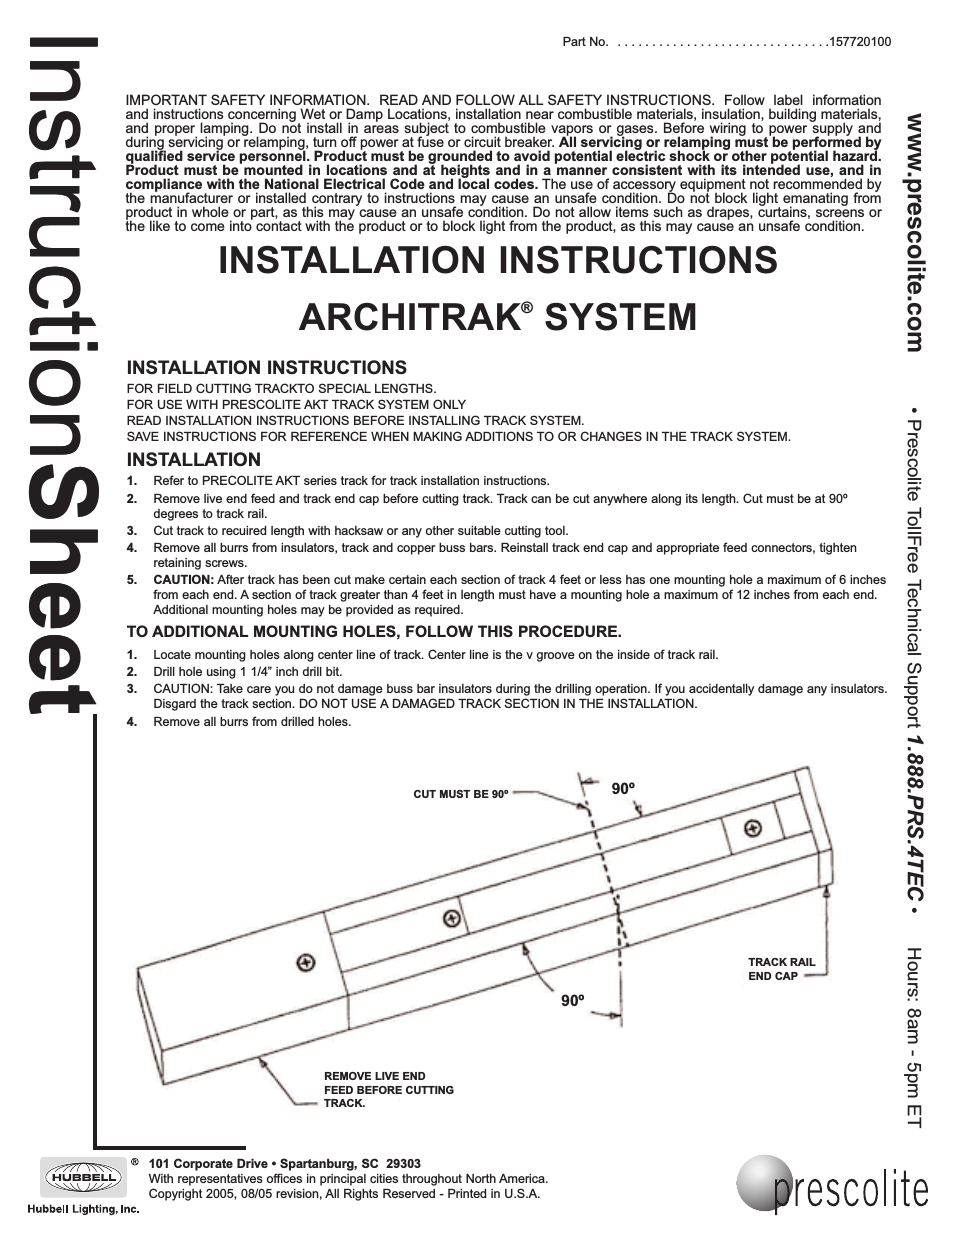 ARCHITRAK SYSTEM Field Cutting Tracks to Special Lengths